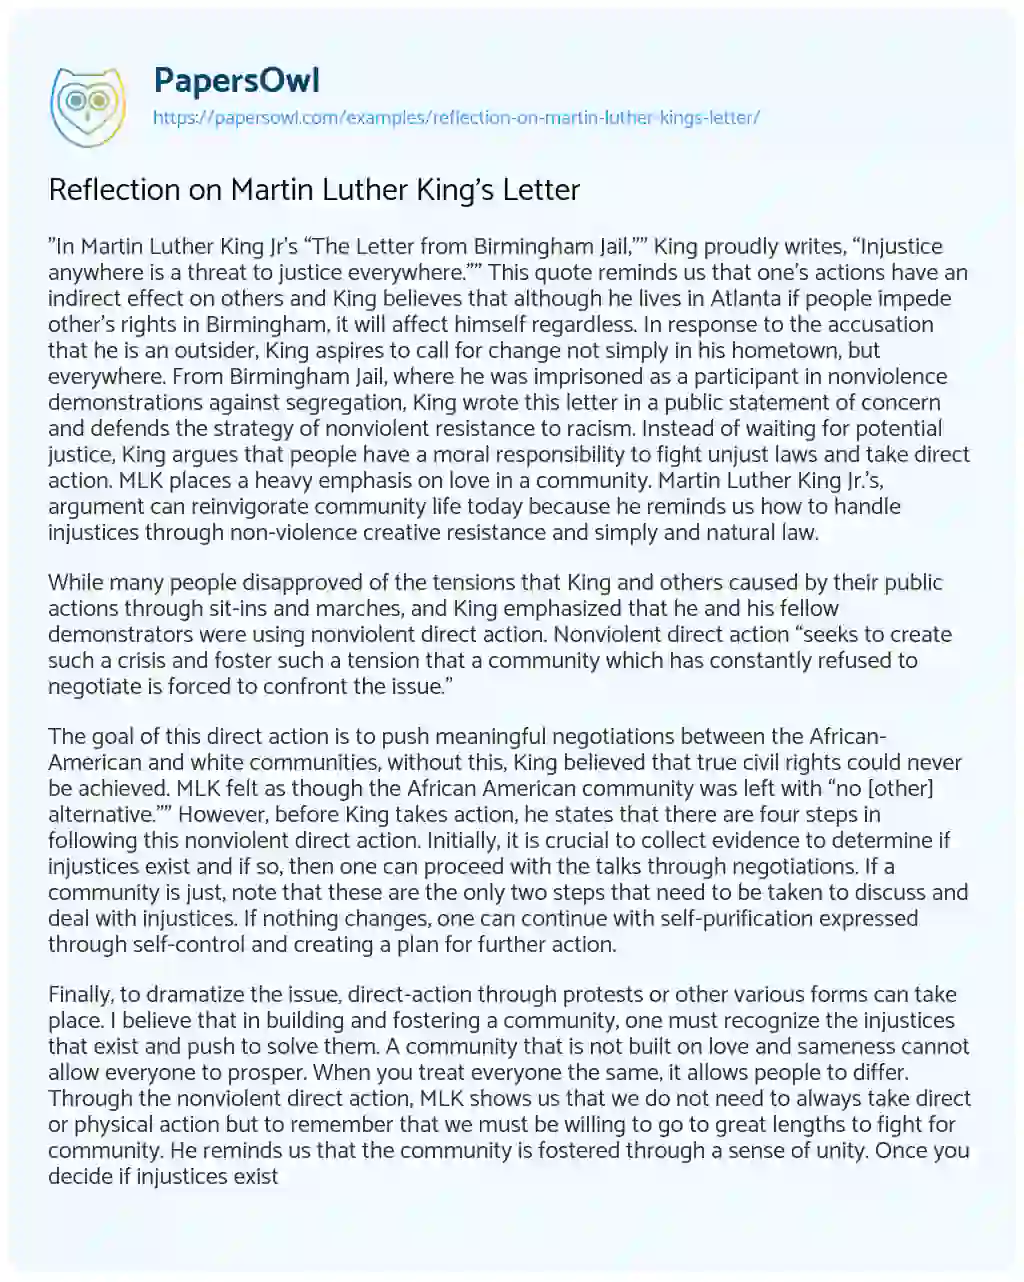 Essay on Reflection on Martin Luther King’s Letter